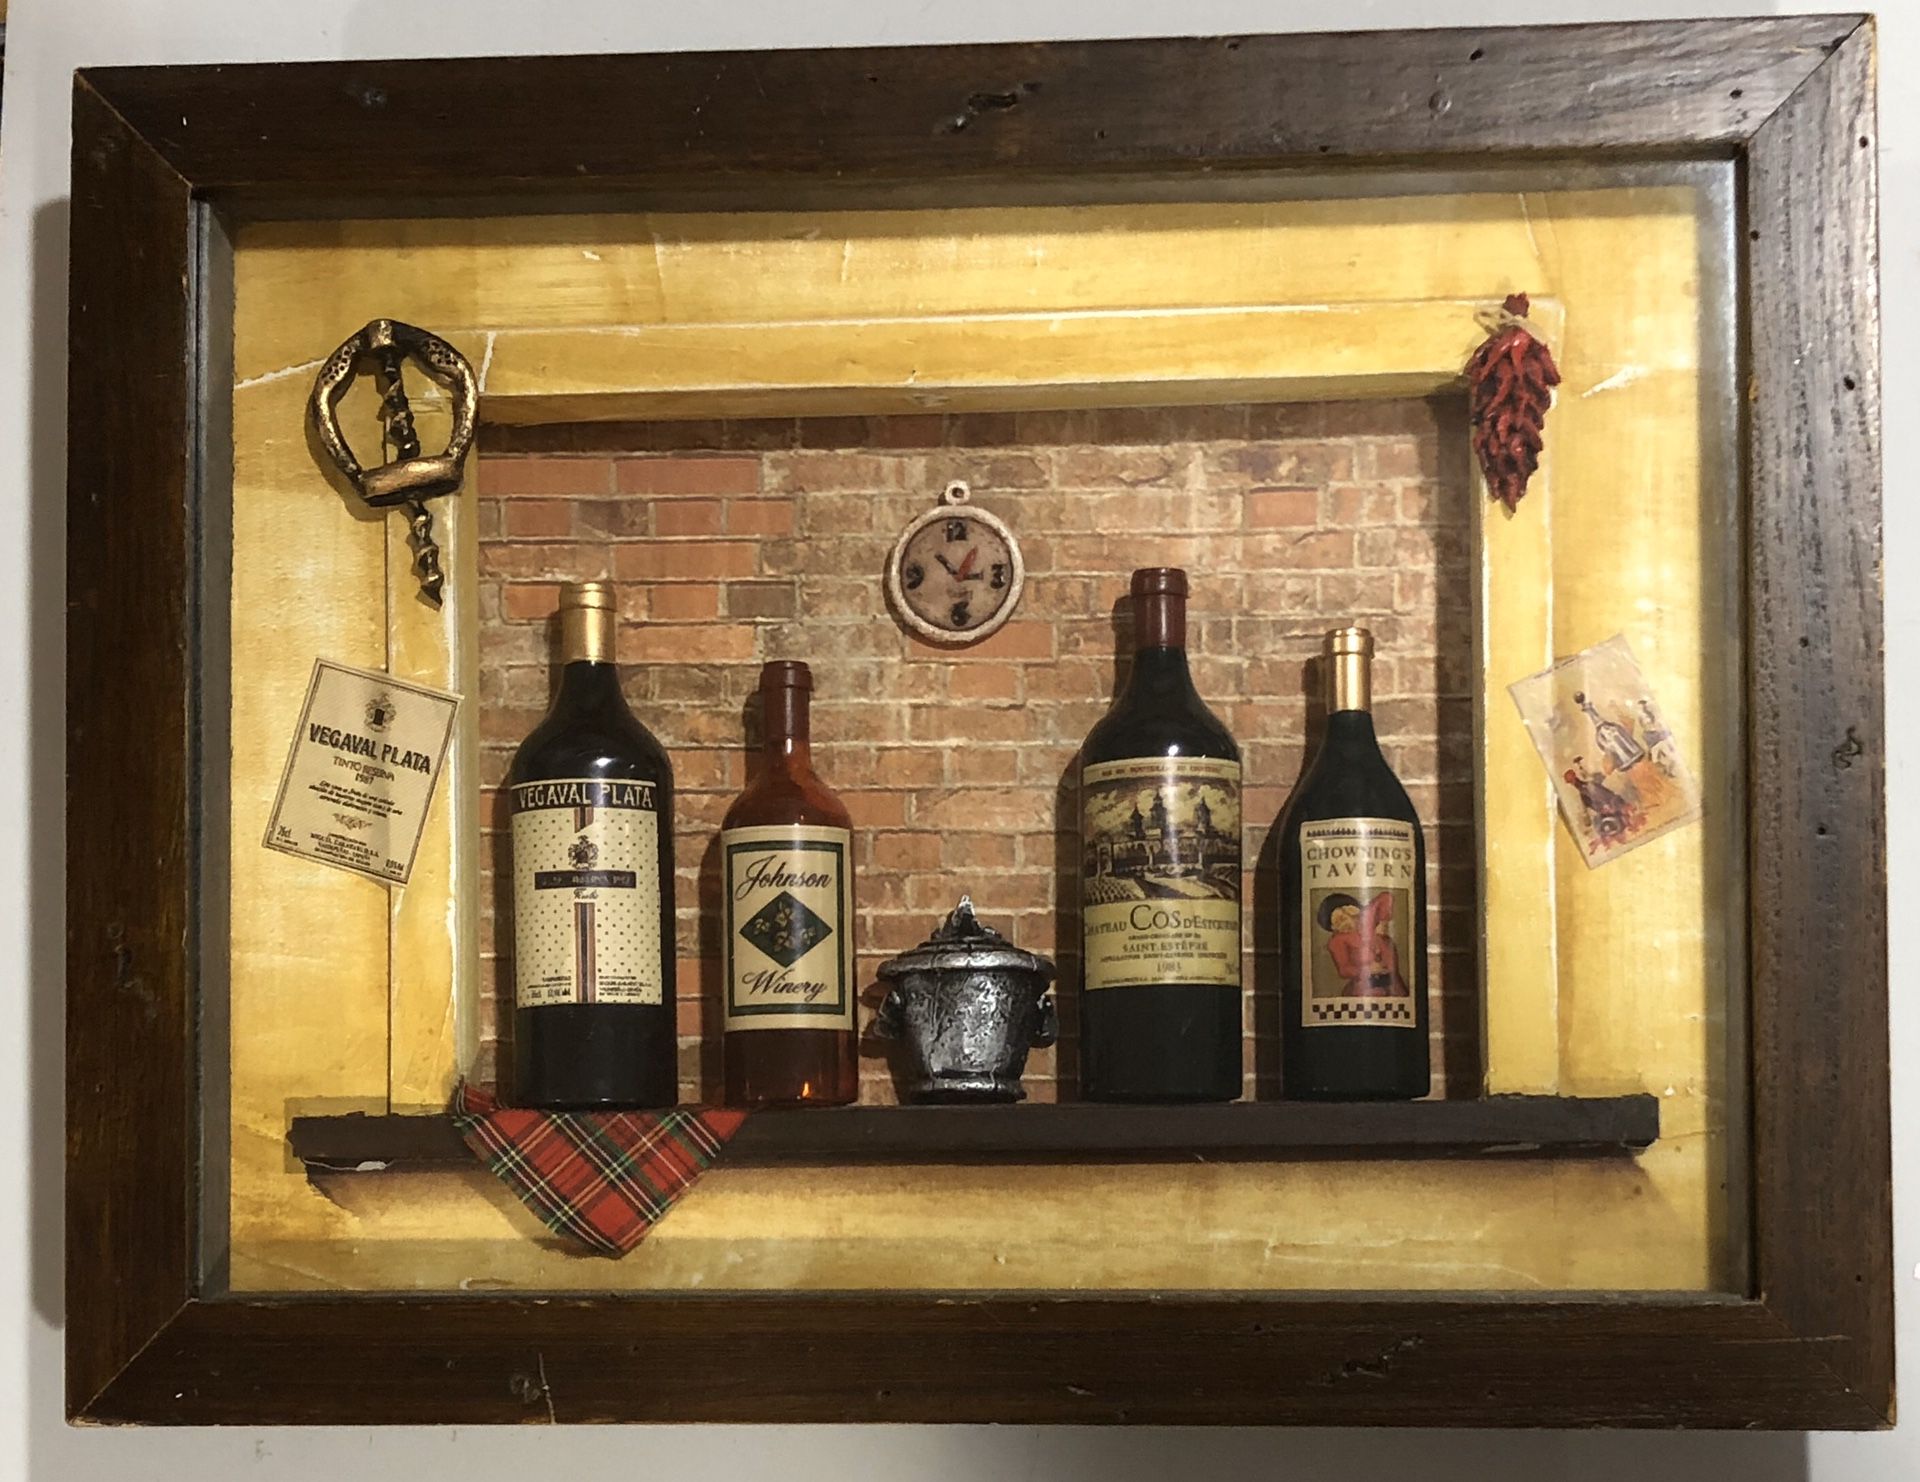 Wall Decor - Vintage Look Bar Counter with Mini Wine Bottles - 15”x11”